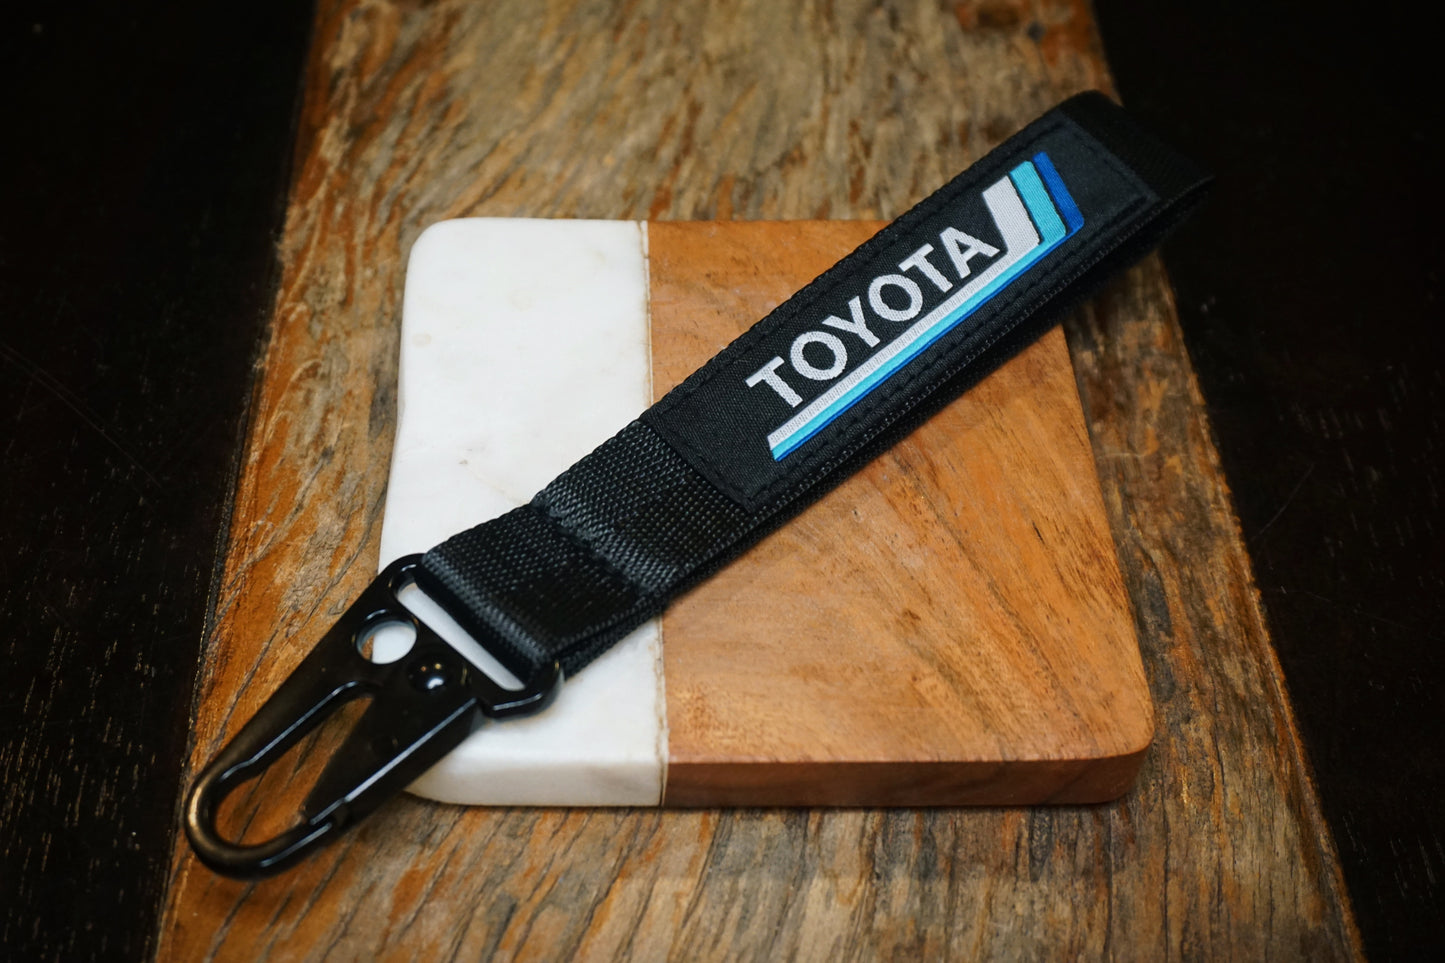 Blue Vintage Heritage Stripes Keychain for Toyota, Metal Clip-On Accessory